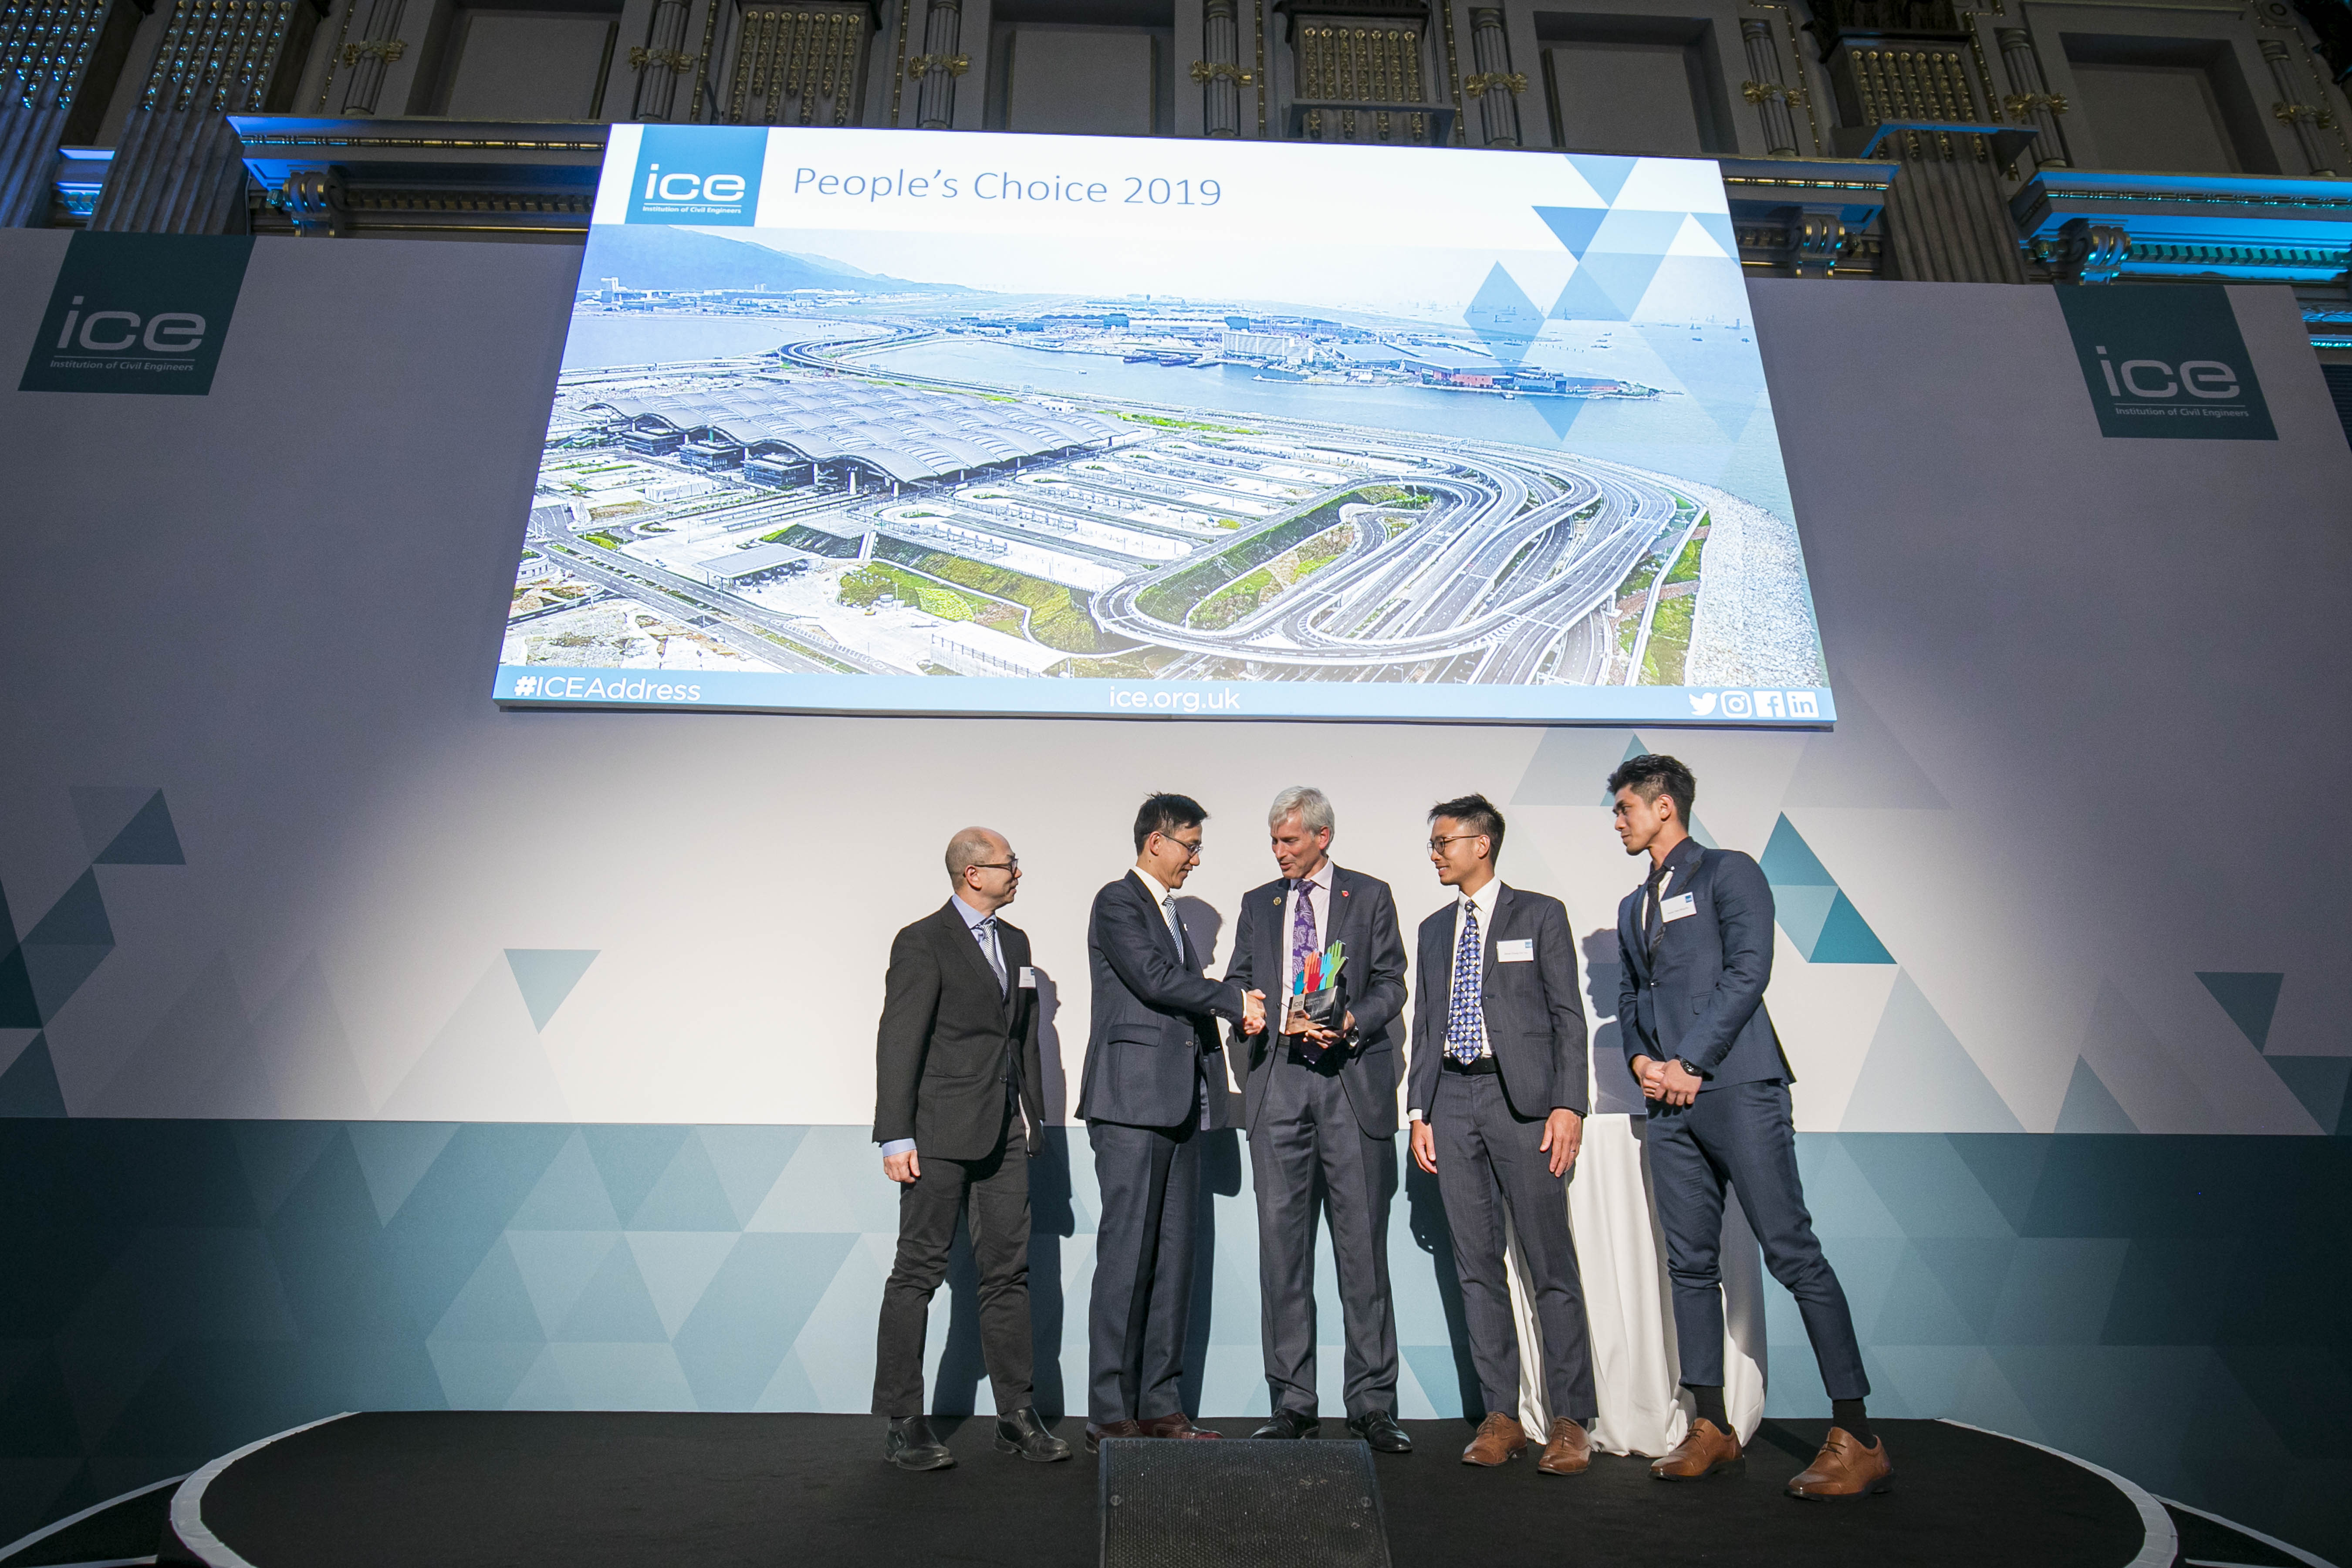 The Hong Kong-Zhuhai-Macao Bridge Hong Kong Section project (comprising the Hong Kong Link Road and Hong Kong Port) was awarded the Institution of Civil Engineers (ICE) People's Choice Award 2019